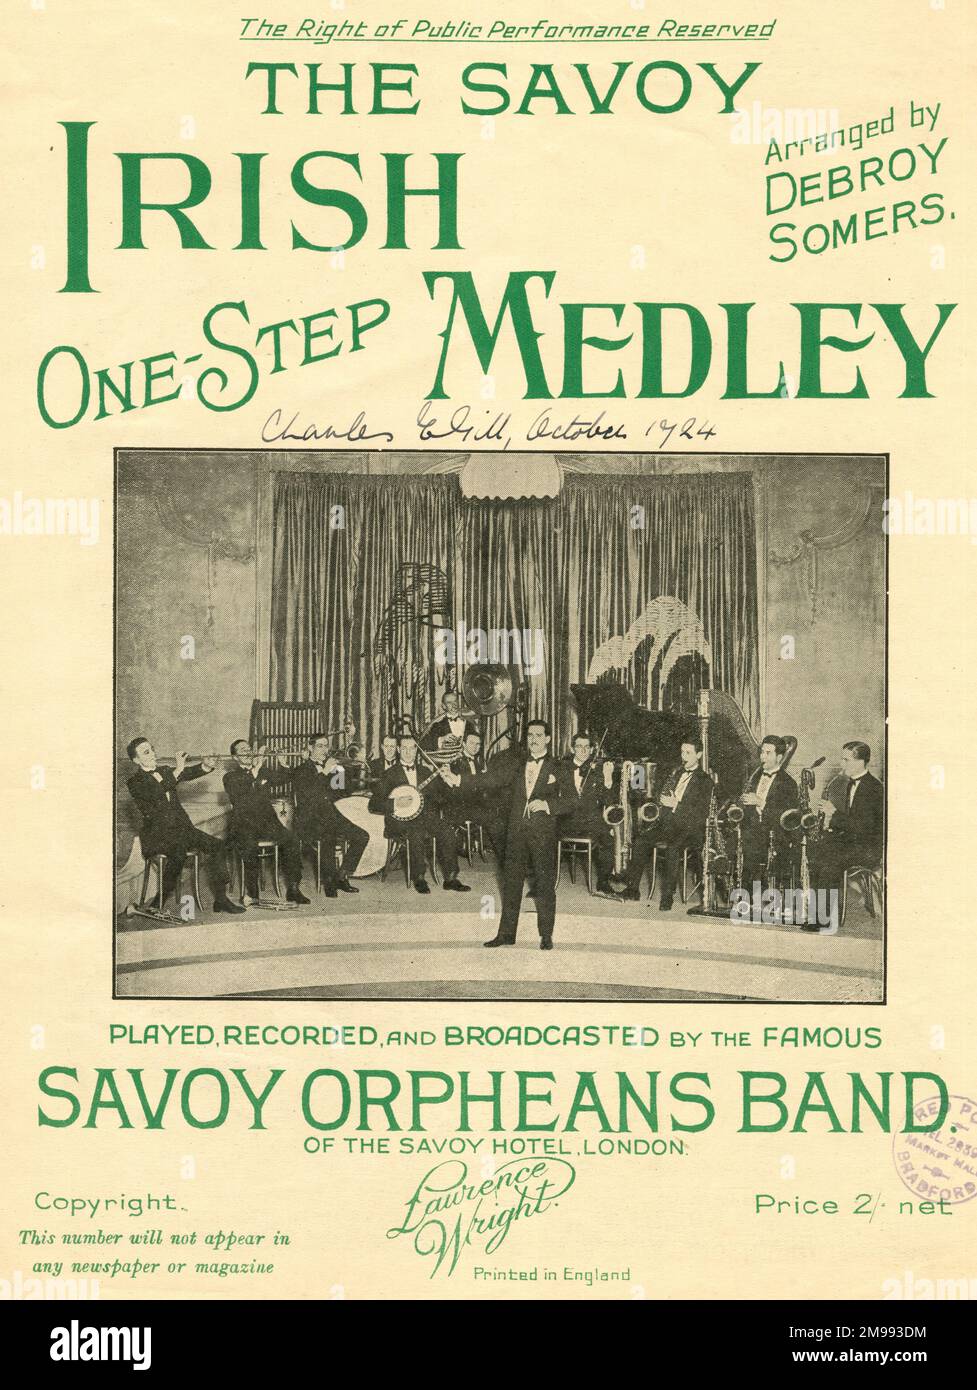 Music cover, The Savoy Orpheans Band, One-Step Irish Medley, arranged by Debroy Somers, Savoy Hotel, London. Stock Photo